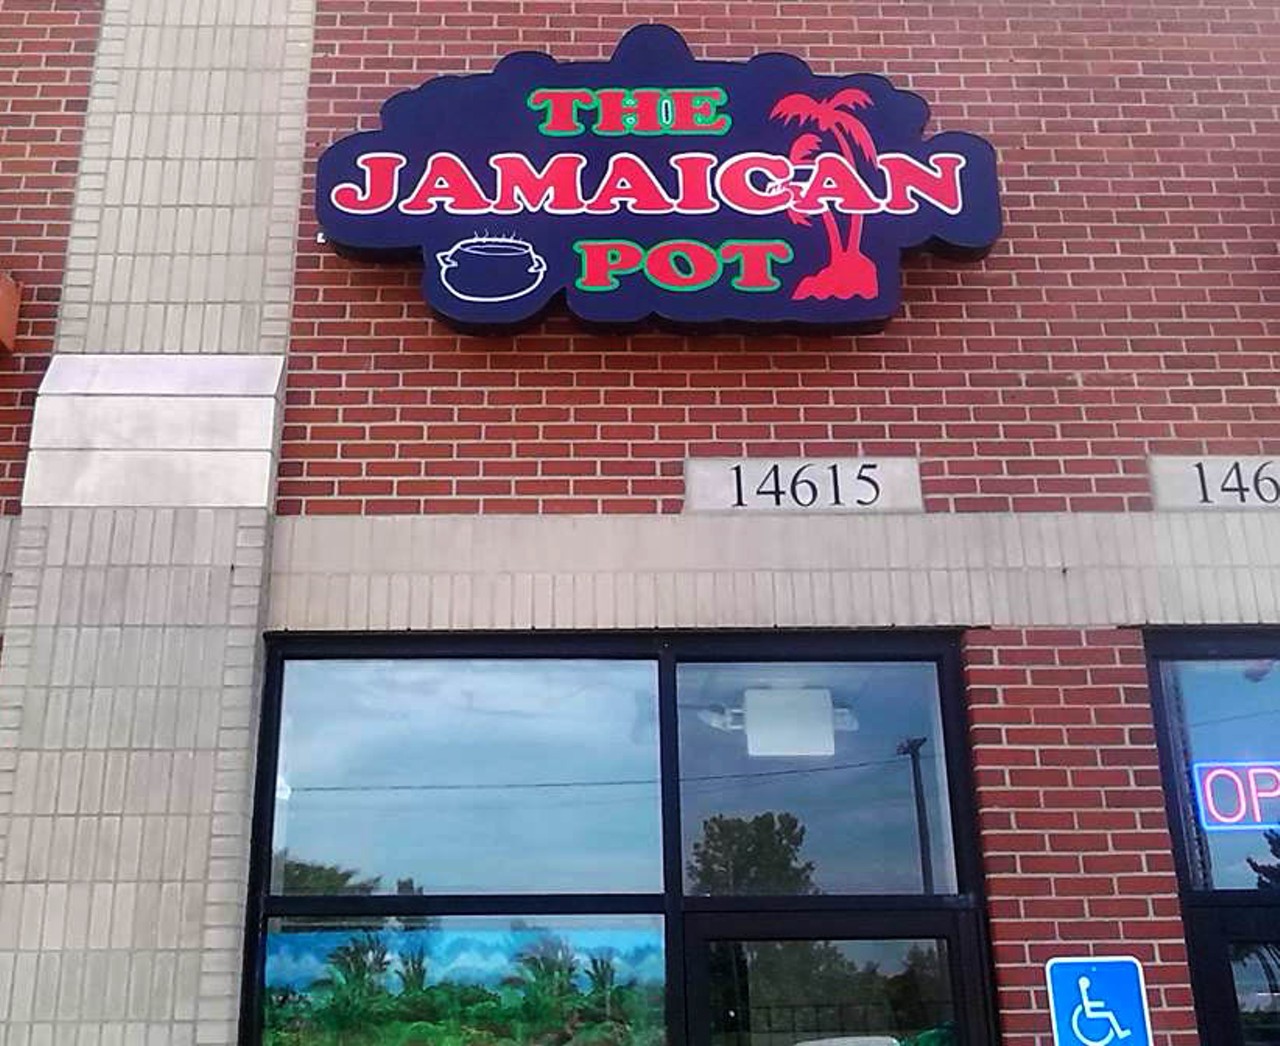 Jamaican Pot
14615 W 8 Mile Rd, Detroit
313-659-6033
If you're looking for authentic Jamaican food then look no further than the Jamaican Pot in Detroit. They serve up this best island food in Detroit, and the tiny shop is always busy. 
Photo by Tom Perkins